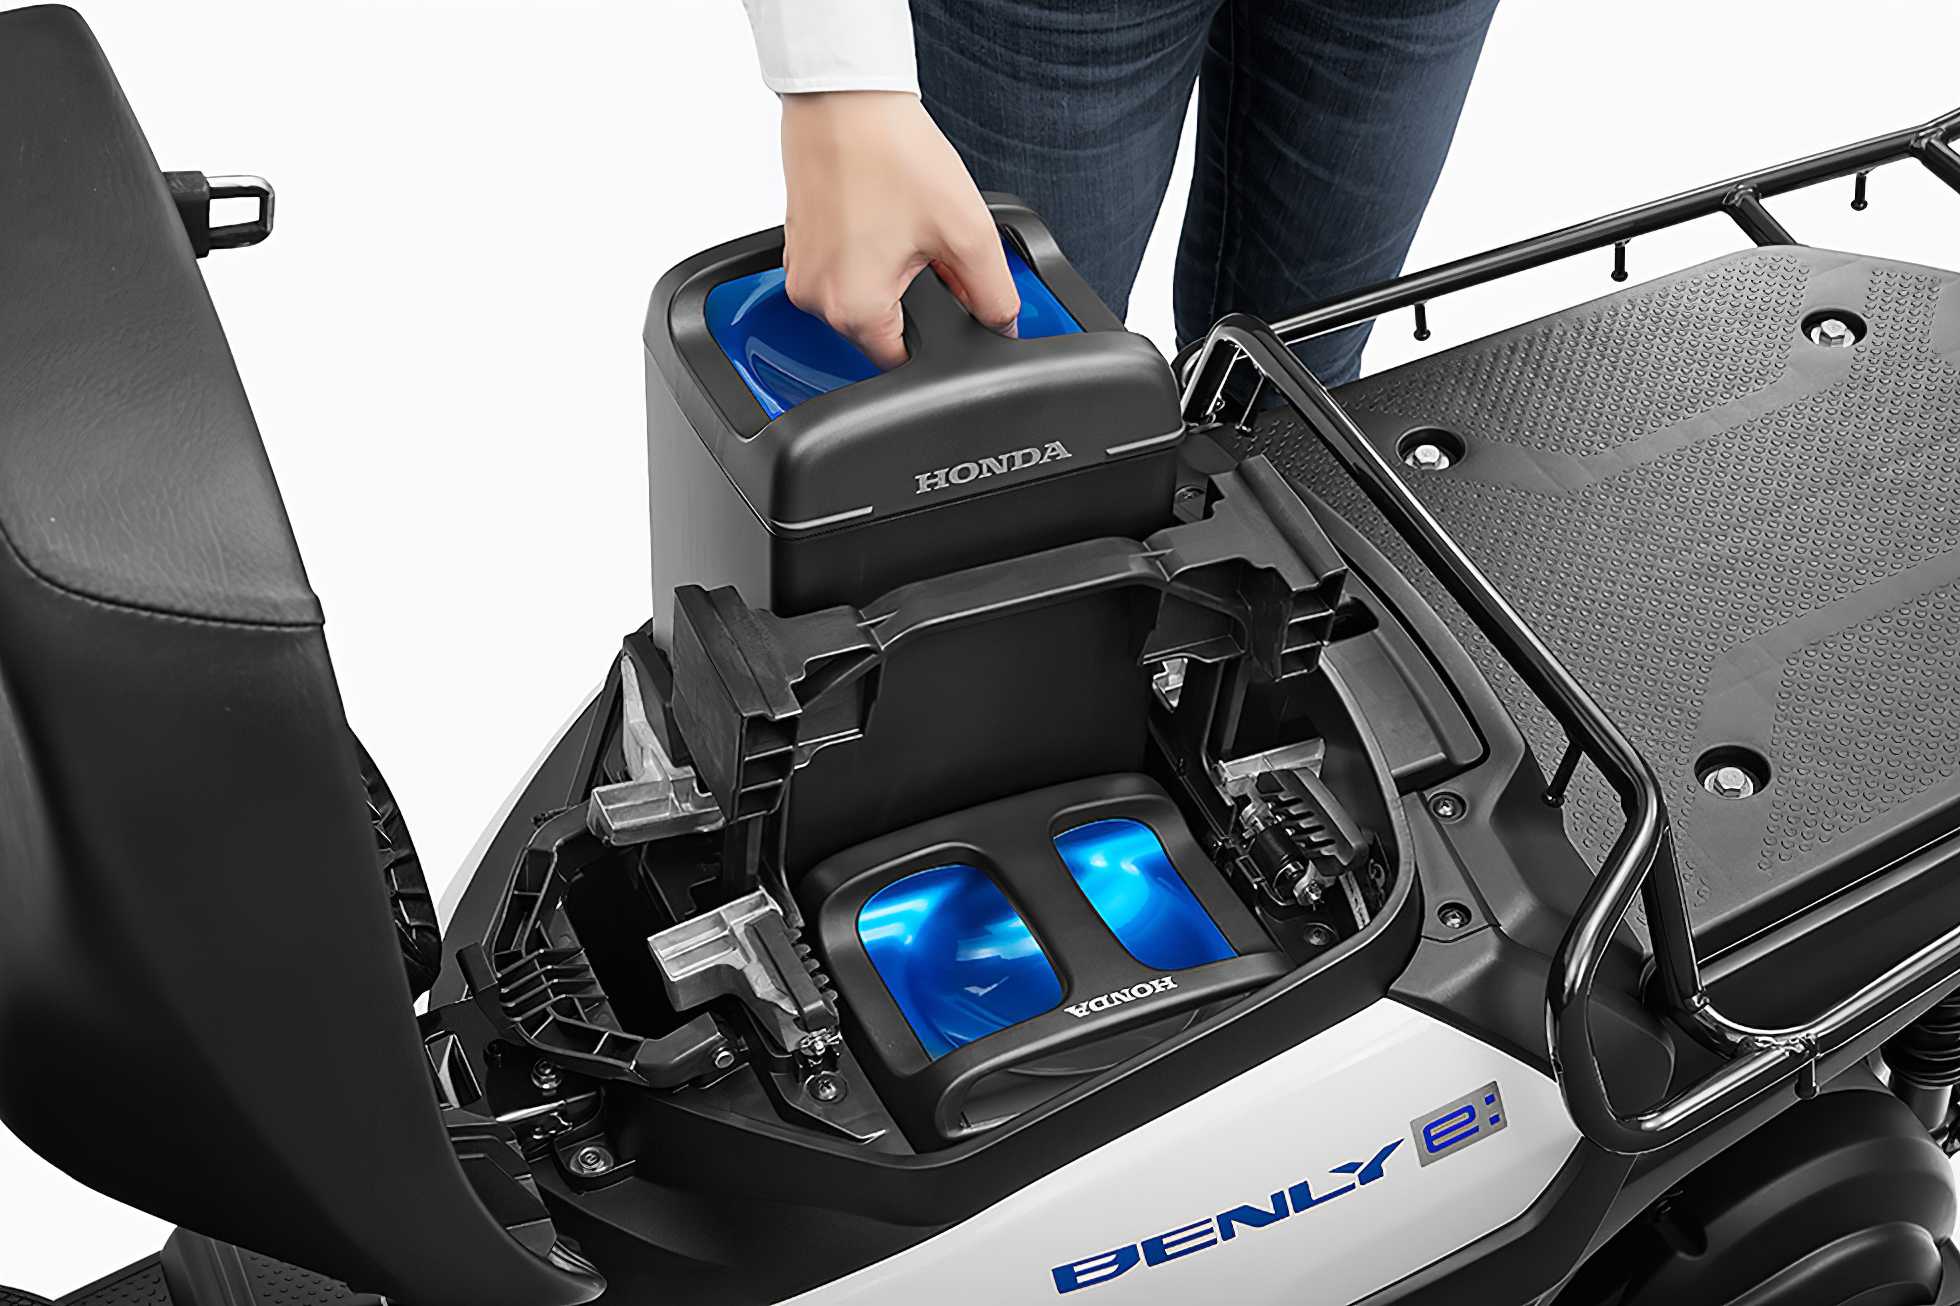 Honda's Mobile Power Pack goes into test operation
- also in the MOTORCYCLES.NEWS APP